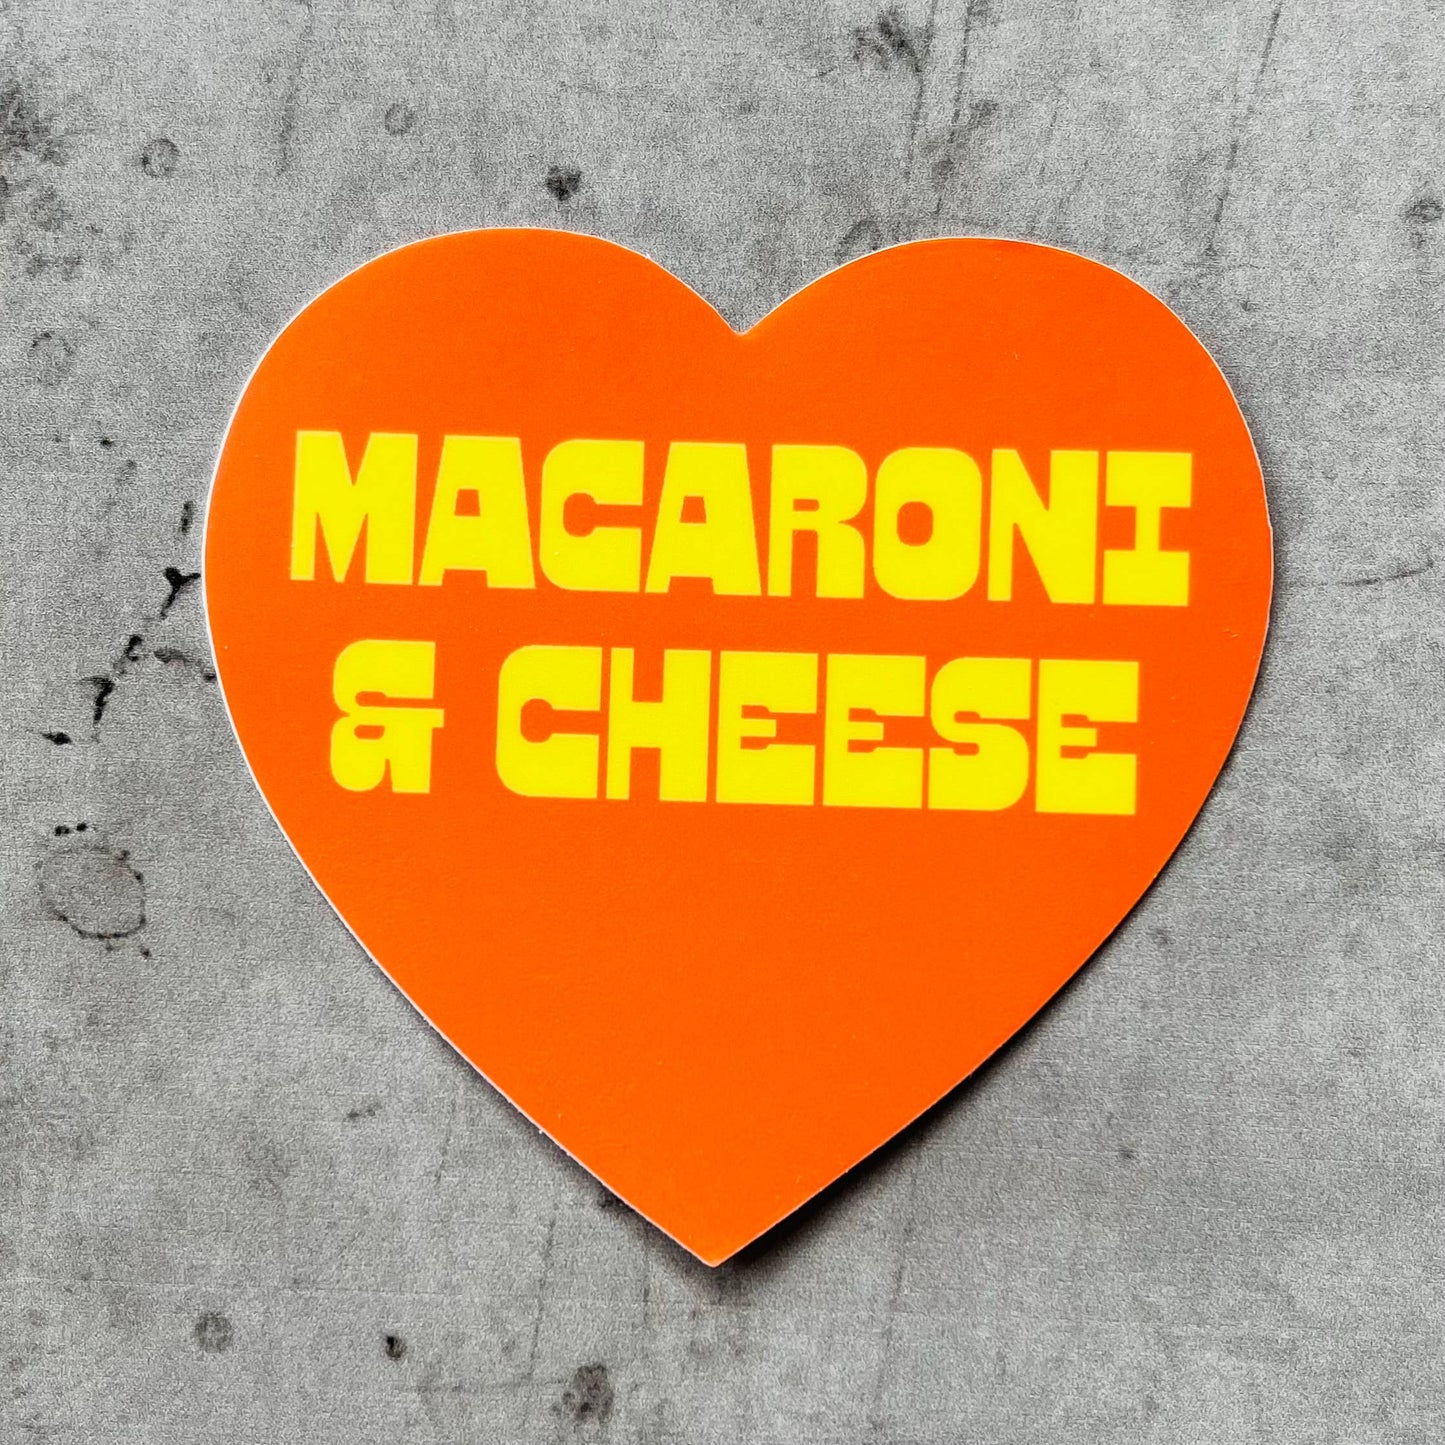 Orange, heart-shaped sticker with "macaroni & cheese" printed in quirky yellow font.